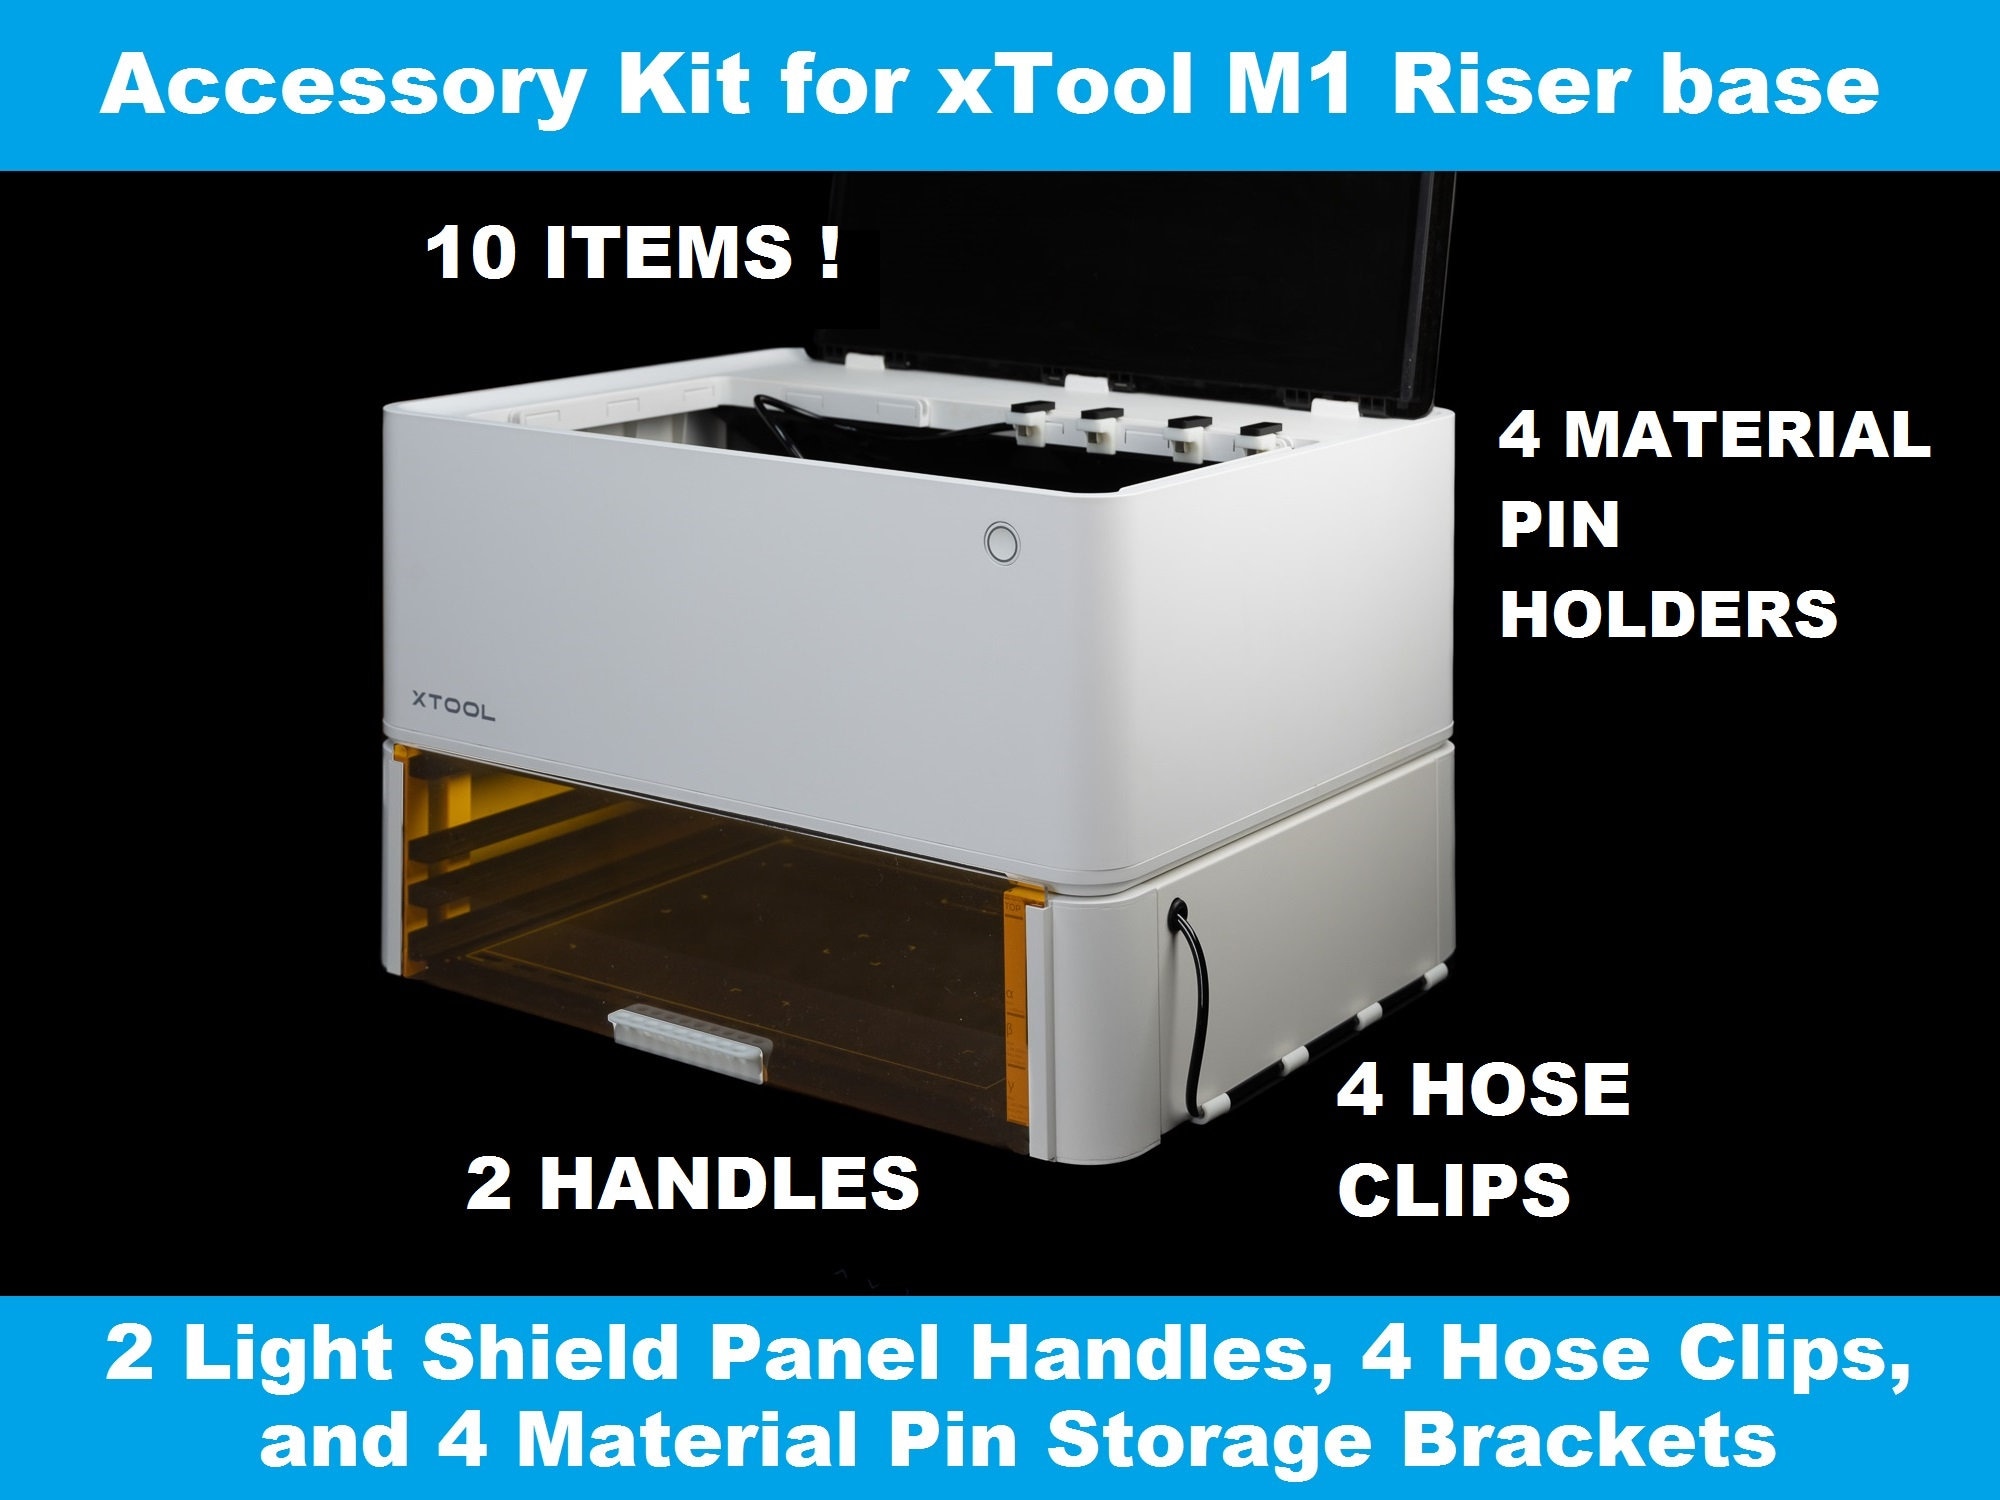 Accessory Kit for the Xtool M1 Riser and Honeycomb Storage Brackets,  Handle, and Hose Clips 